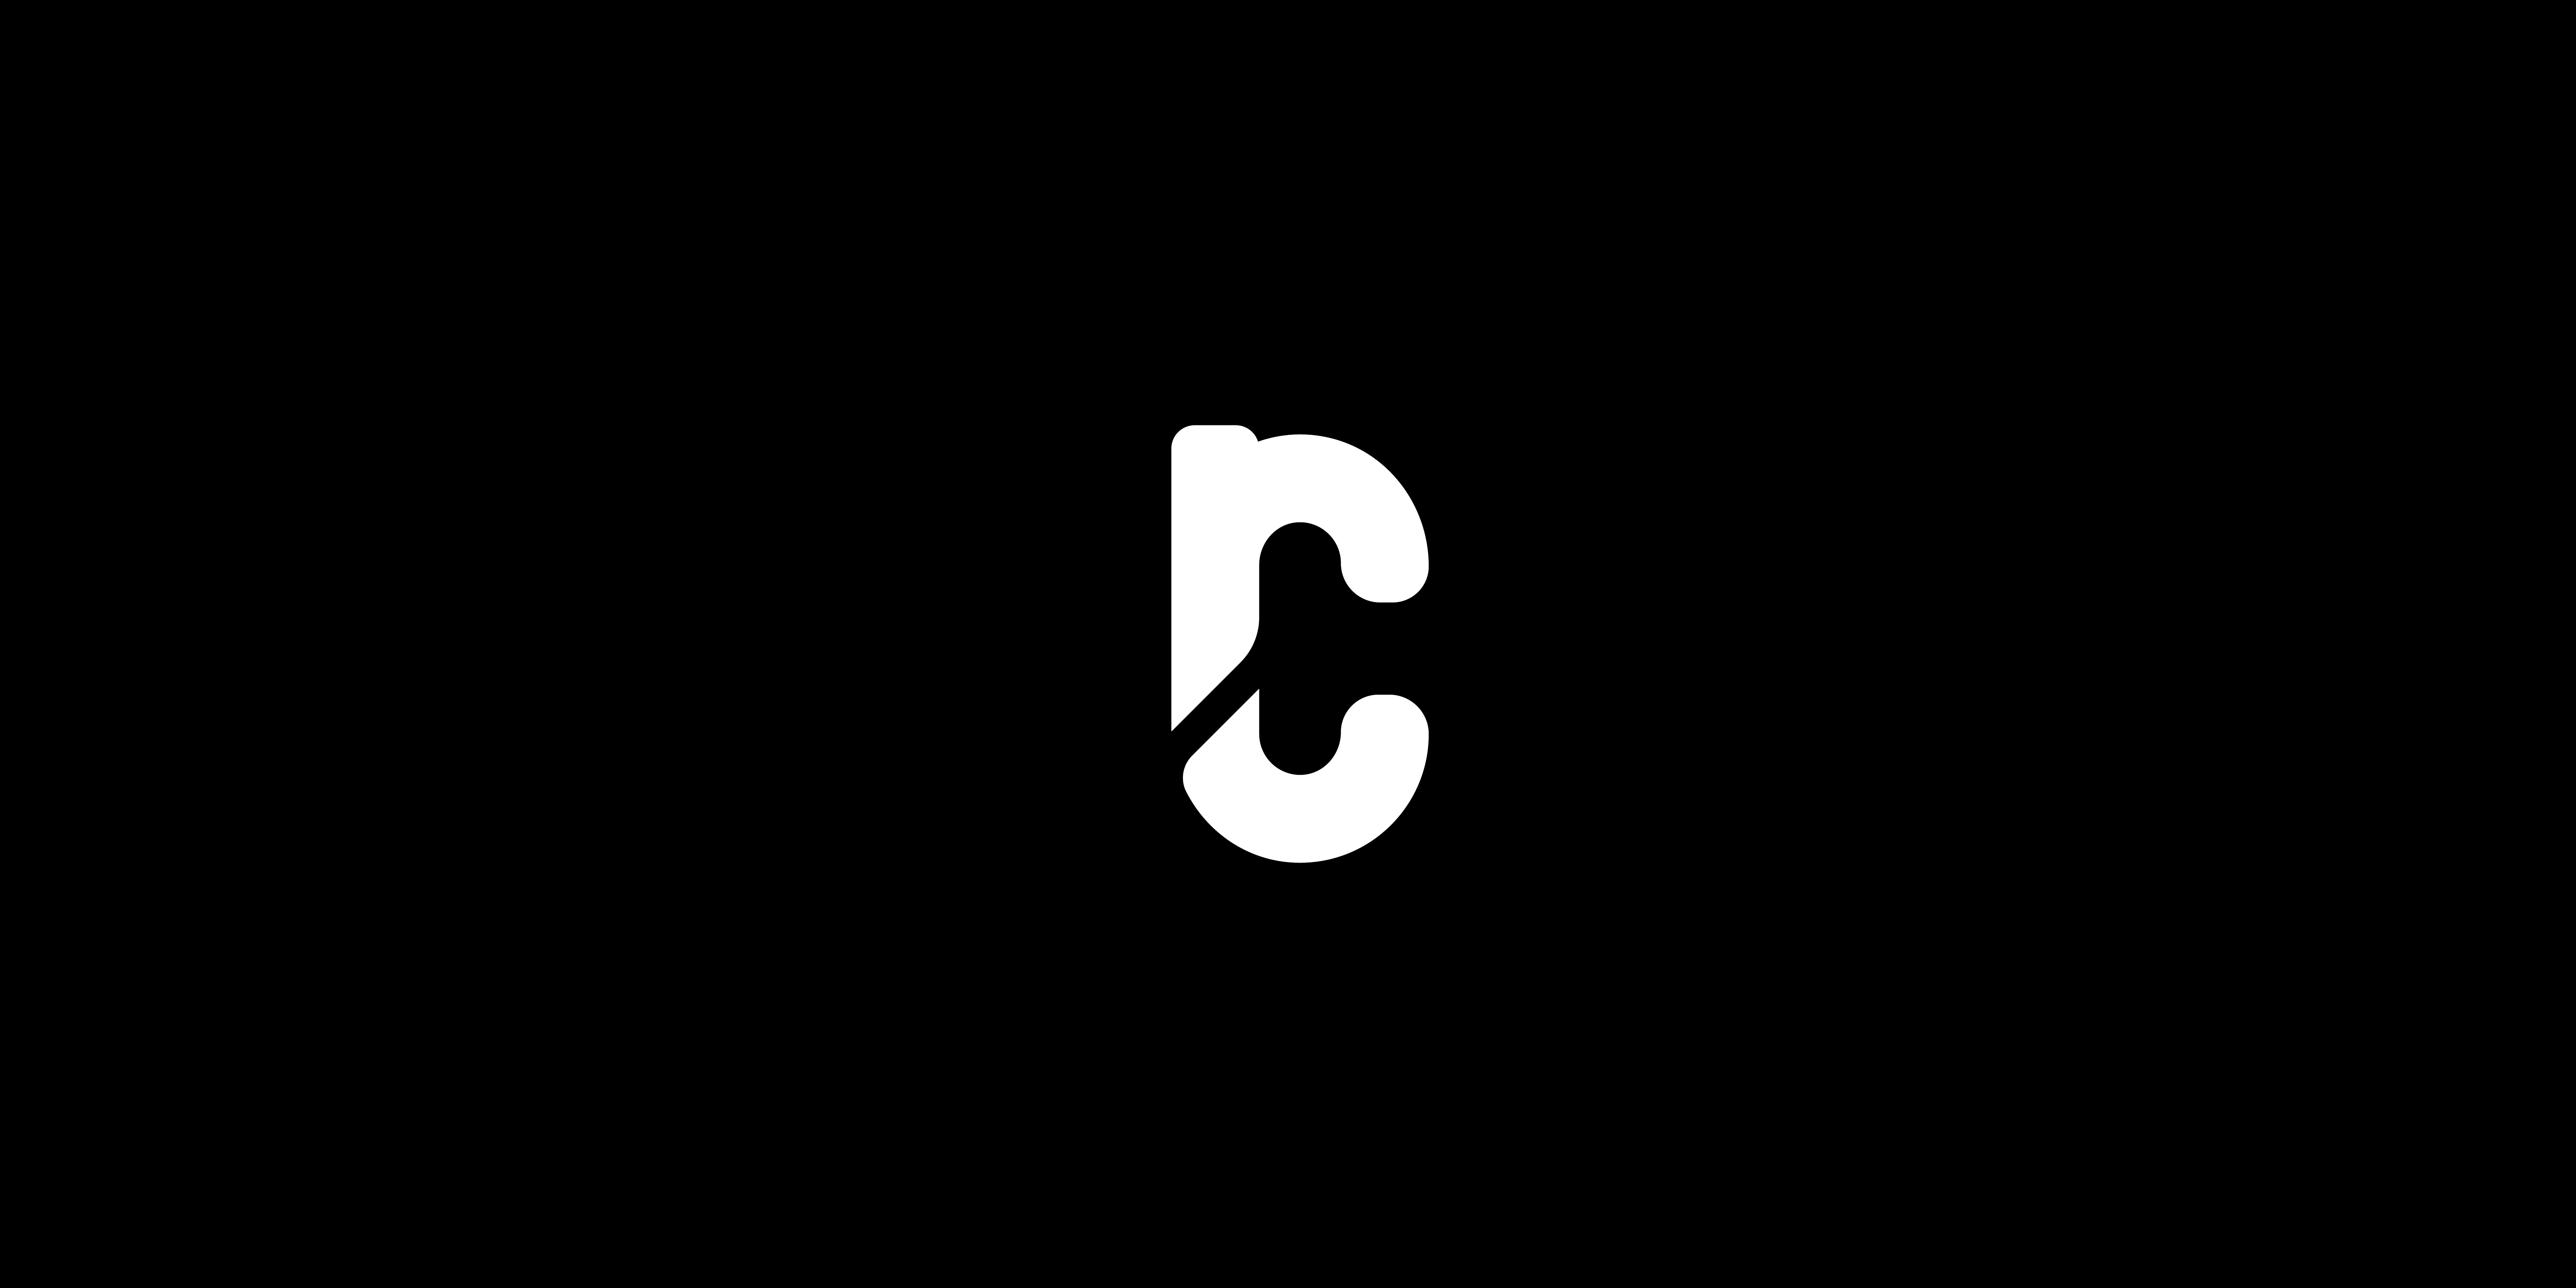 RC Logo - Idea For Personal Logo RC, Is this idea too basic and overused ...